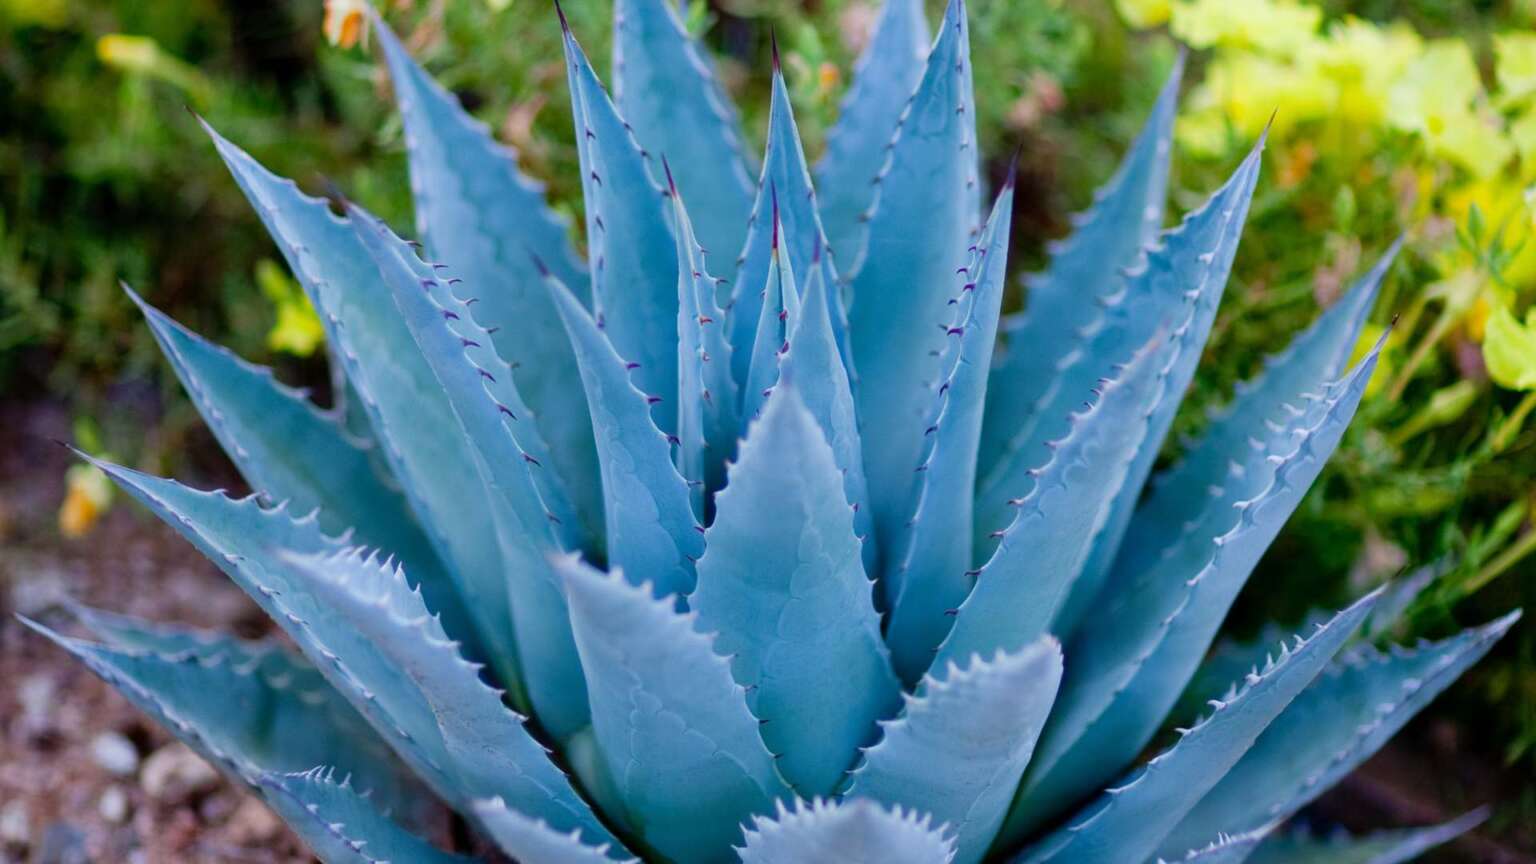 Agave Inulin Powder: A Sweet and Healthful Revelation